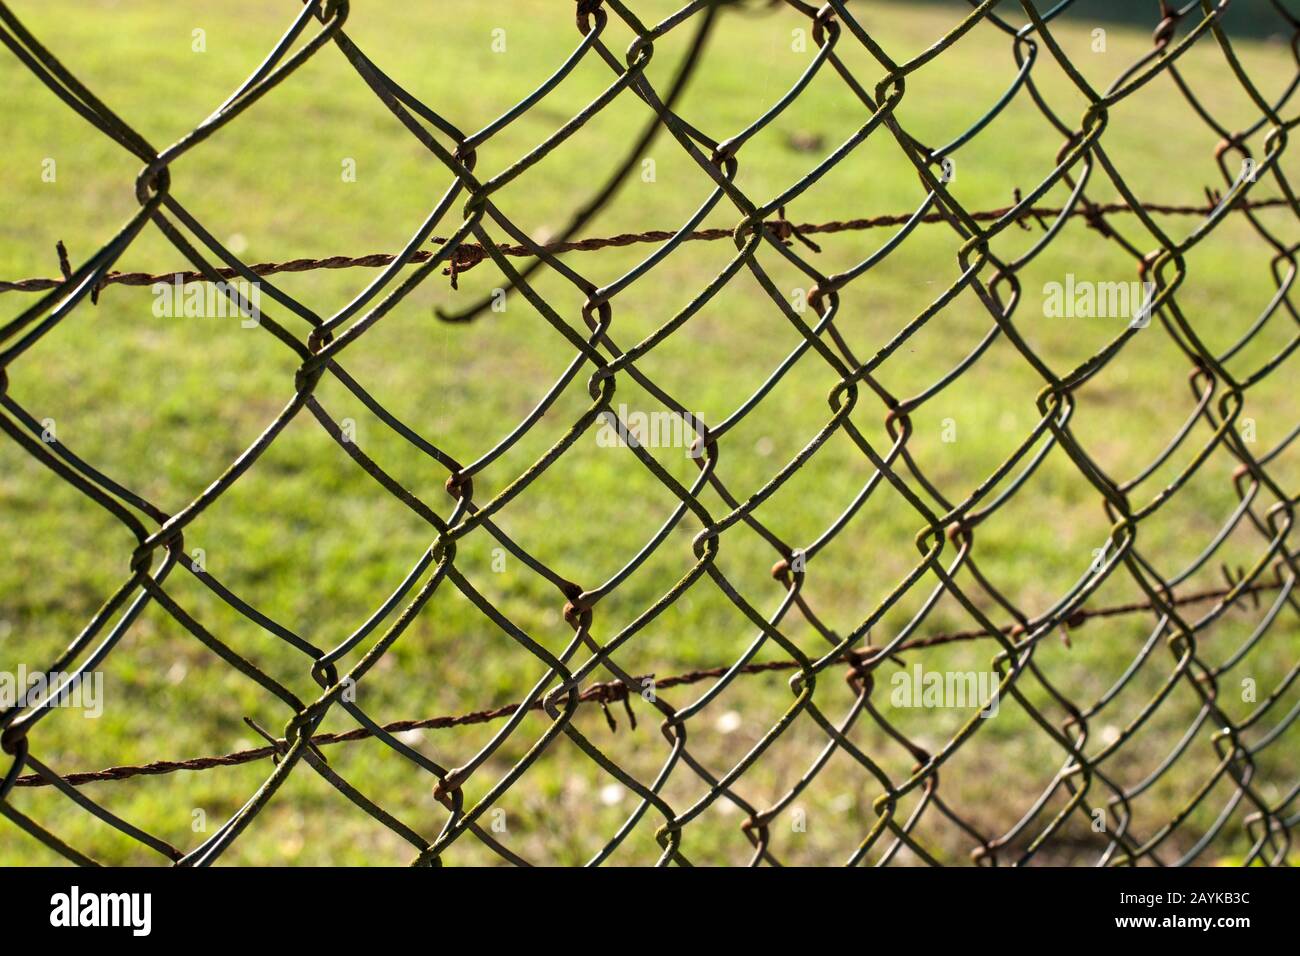 Wire fence (cyclone fencing) in repeating patterns (fence, chain, link) Stock Photo